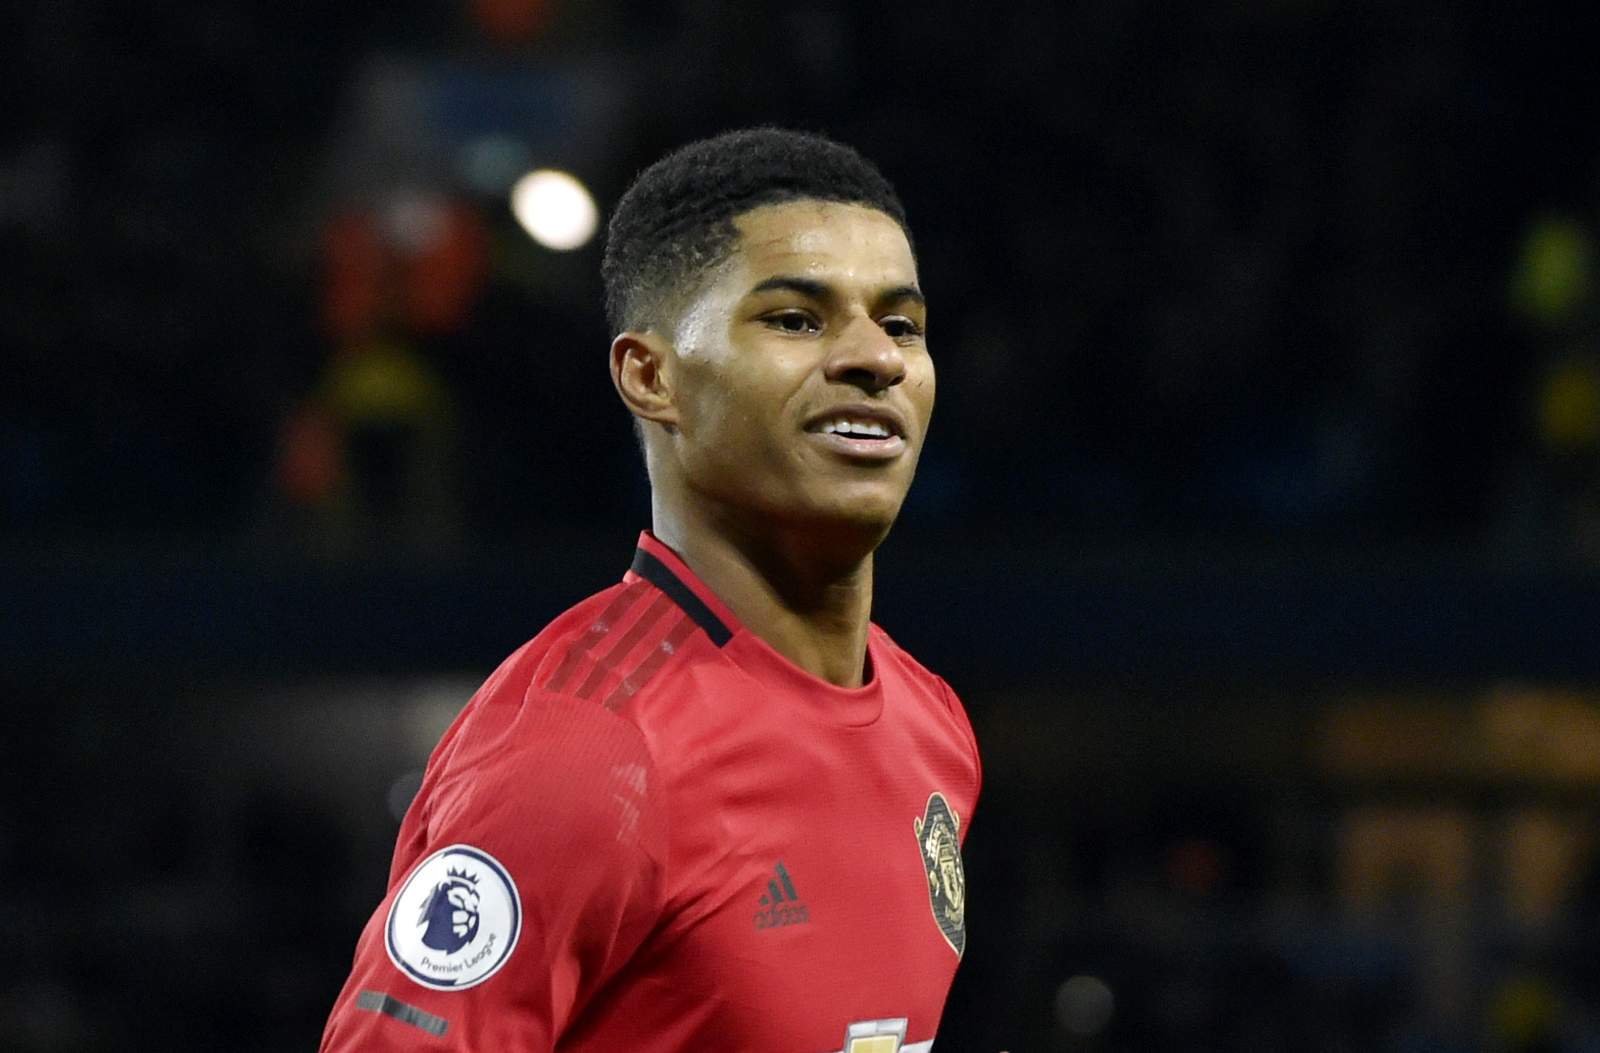 Rashford back to the day job after activism during pandemic